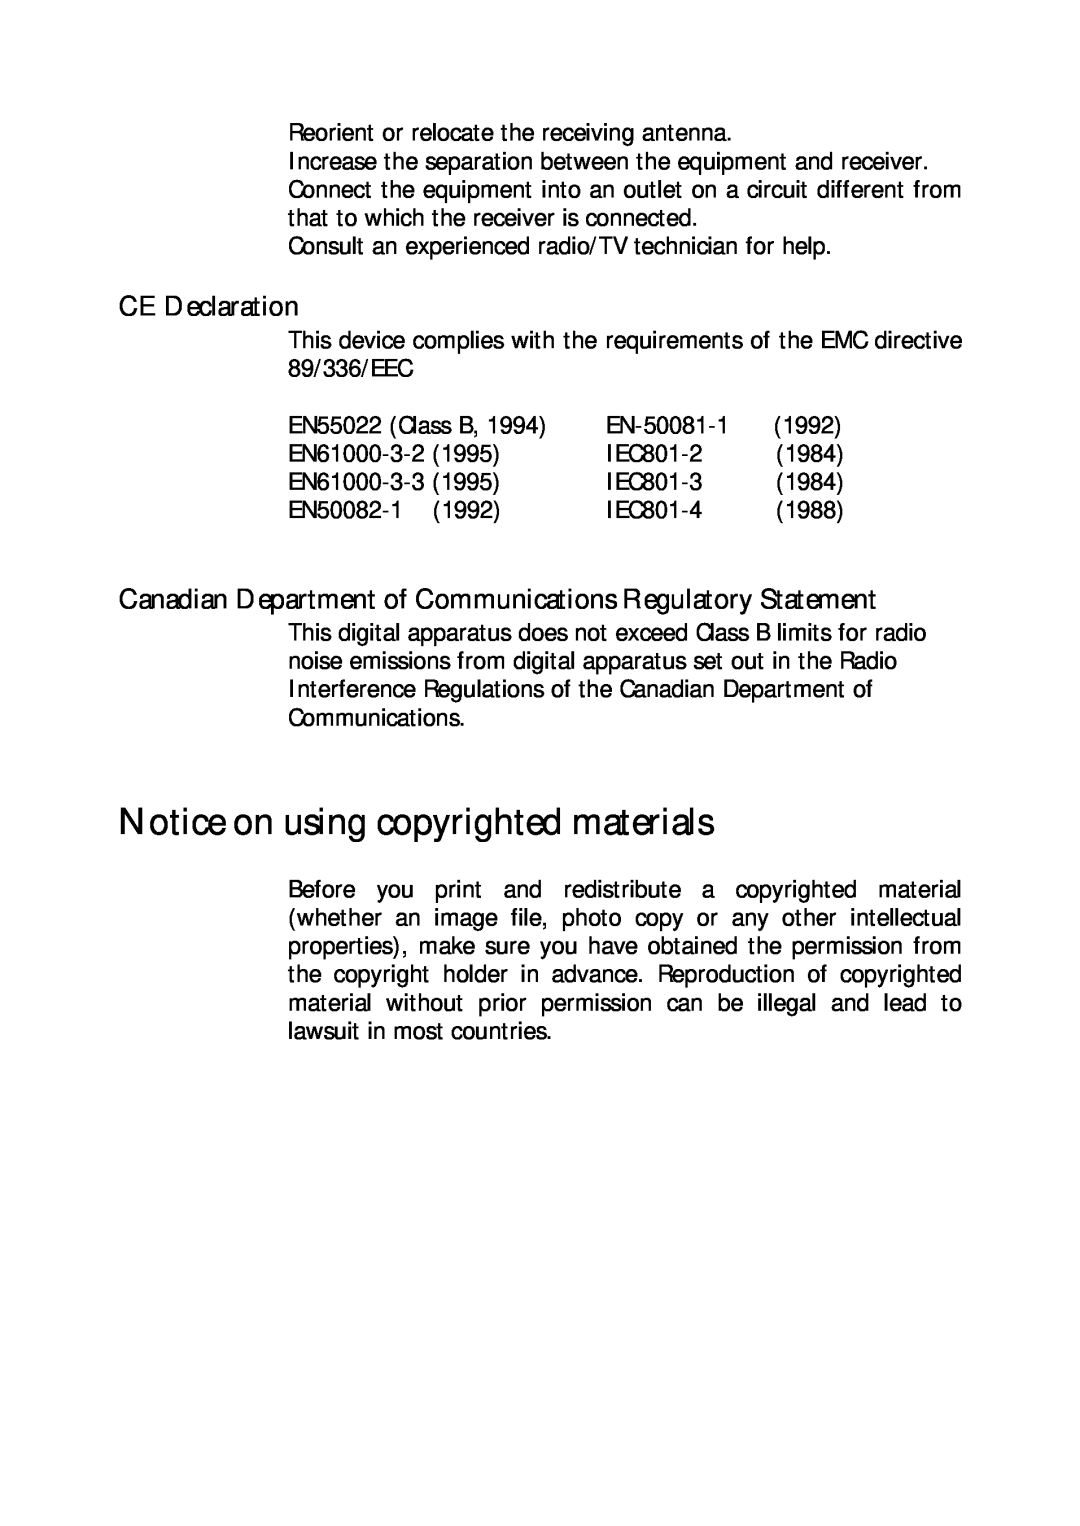 Acer 300P user manual Notice on using copyrighted materials, CE Declaration 